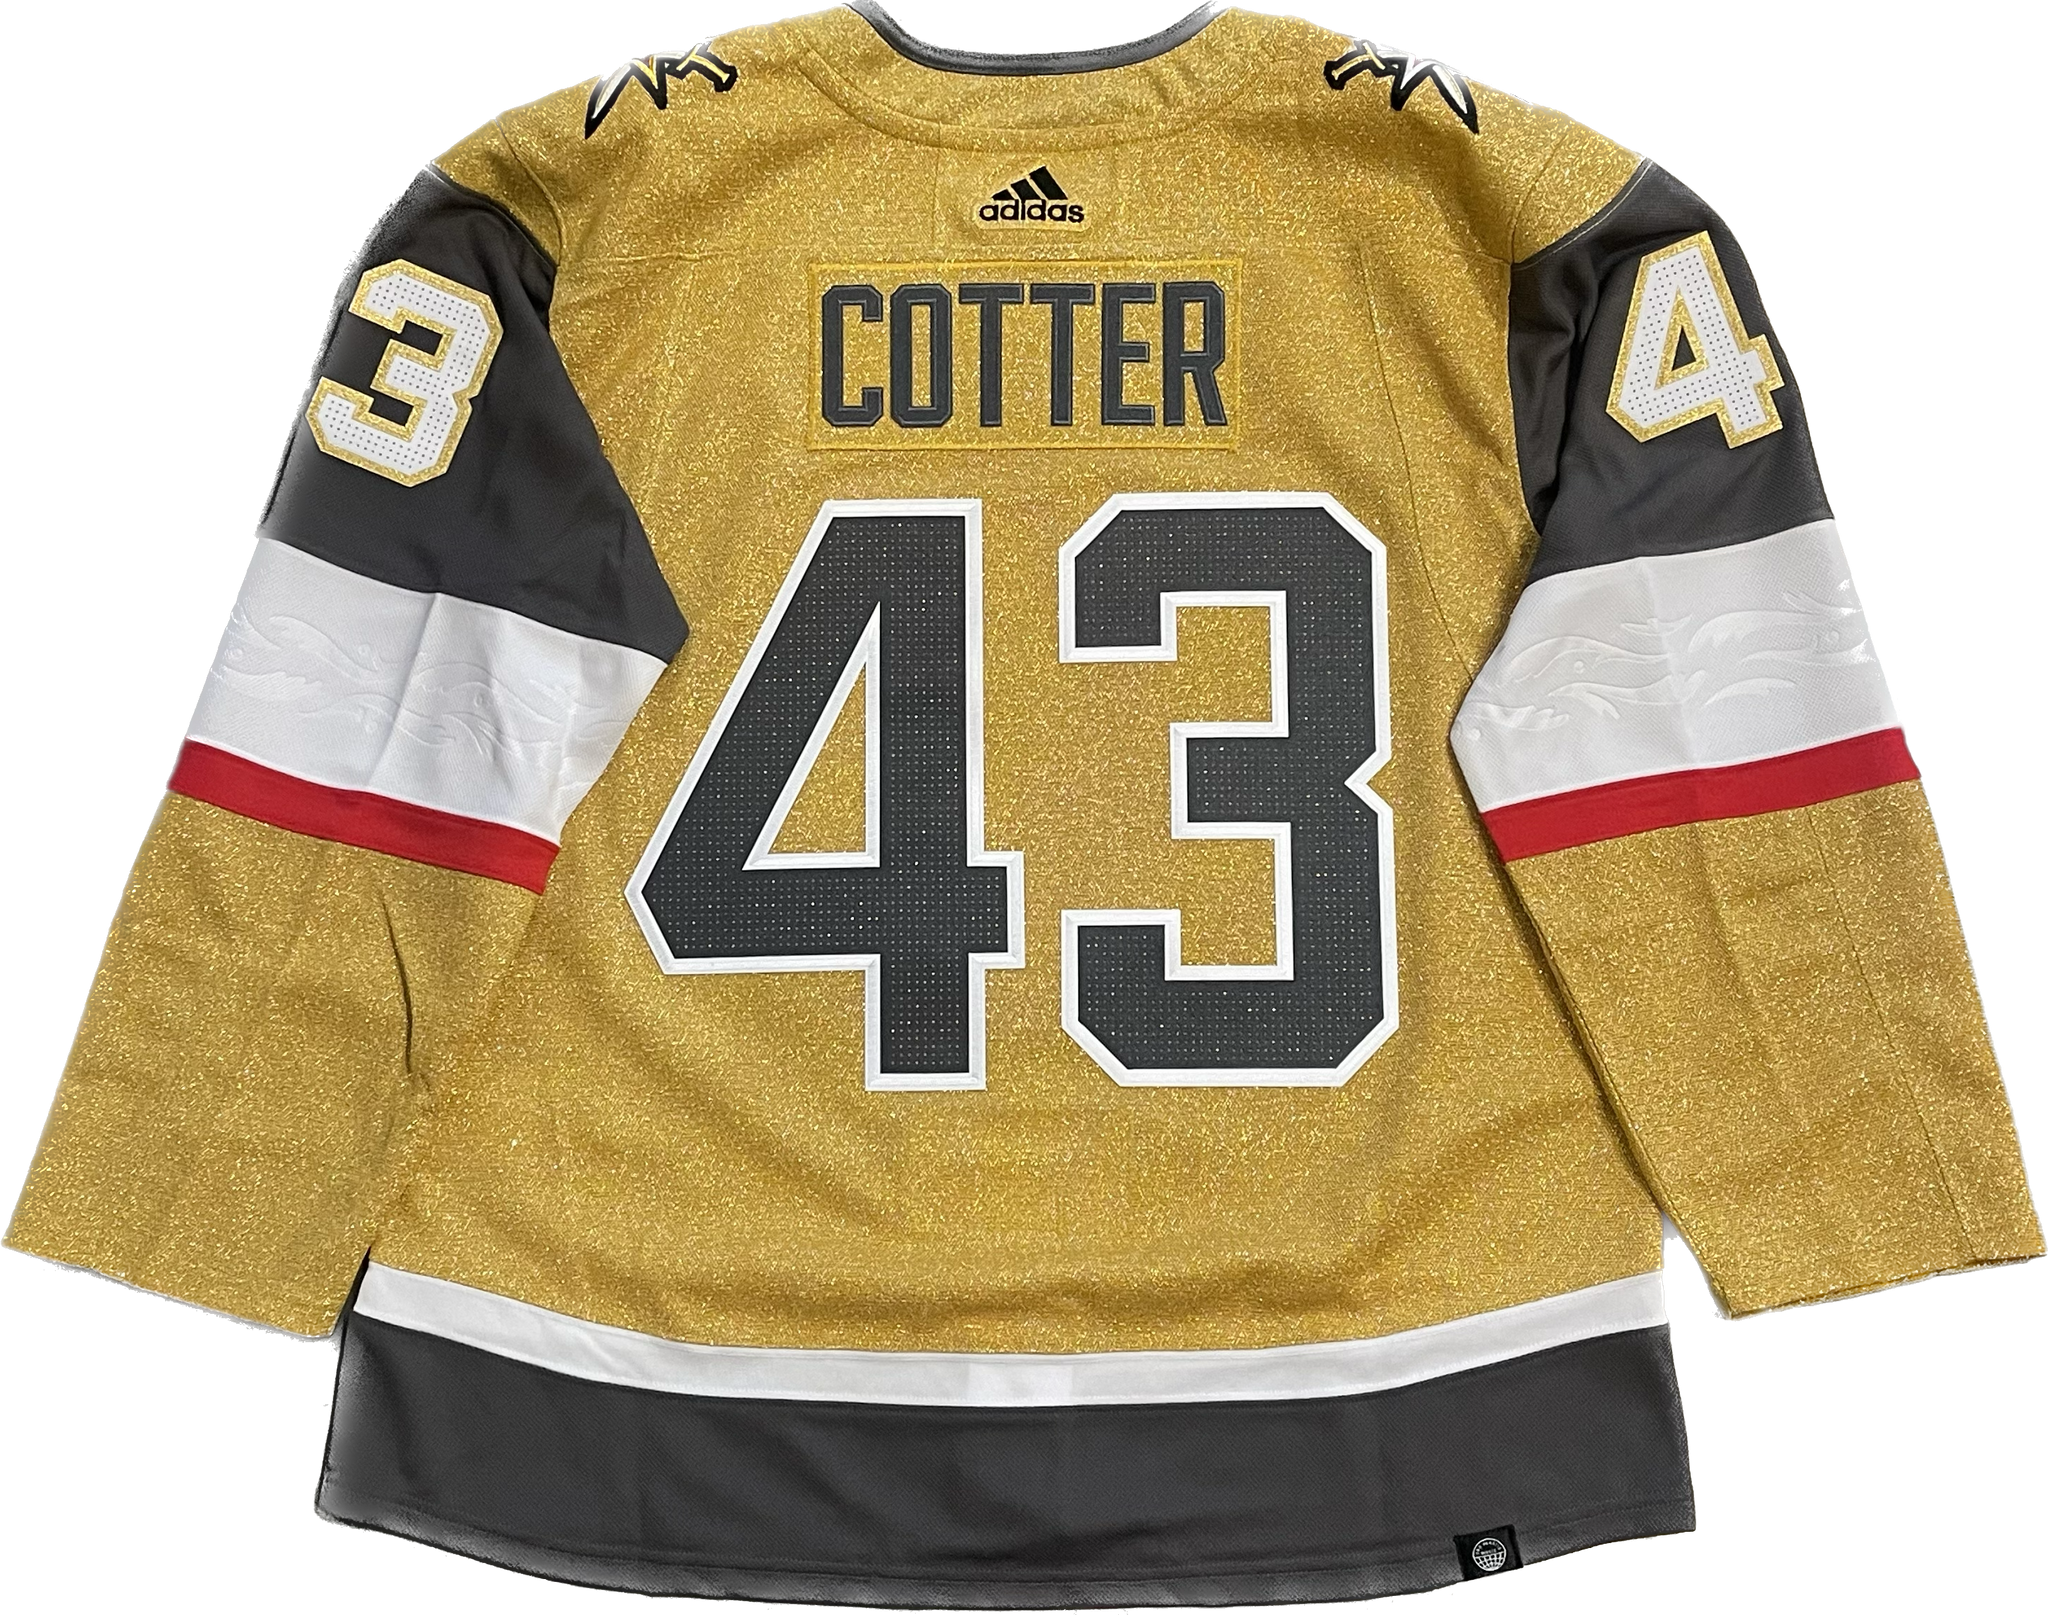 Vegas Golden Knights Paul Cotter #43 Men's Adidas Authentic Home Jersey - Gold ***